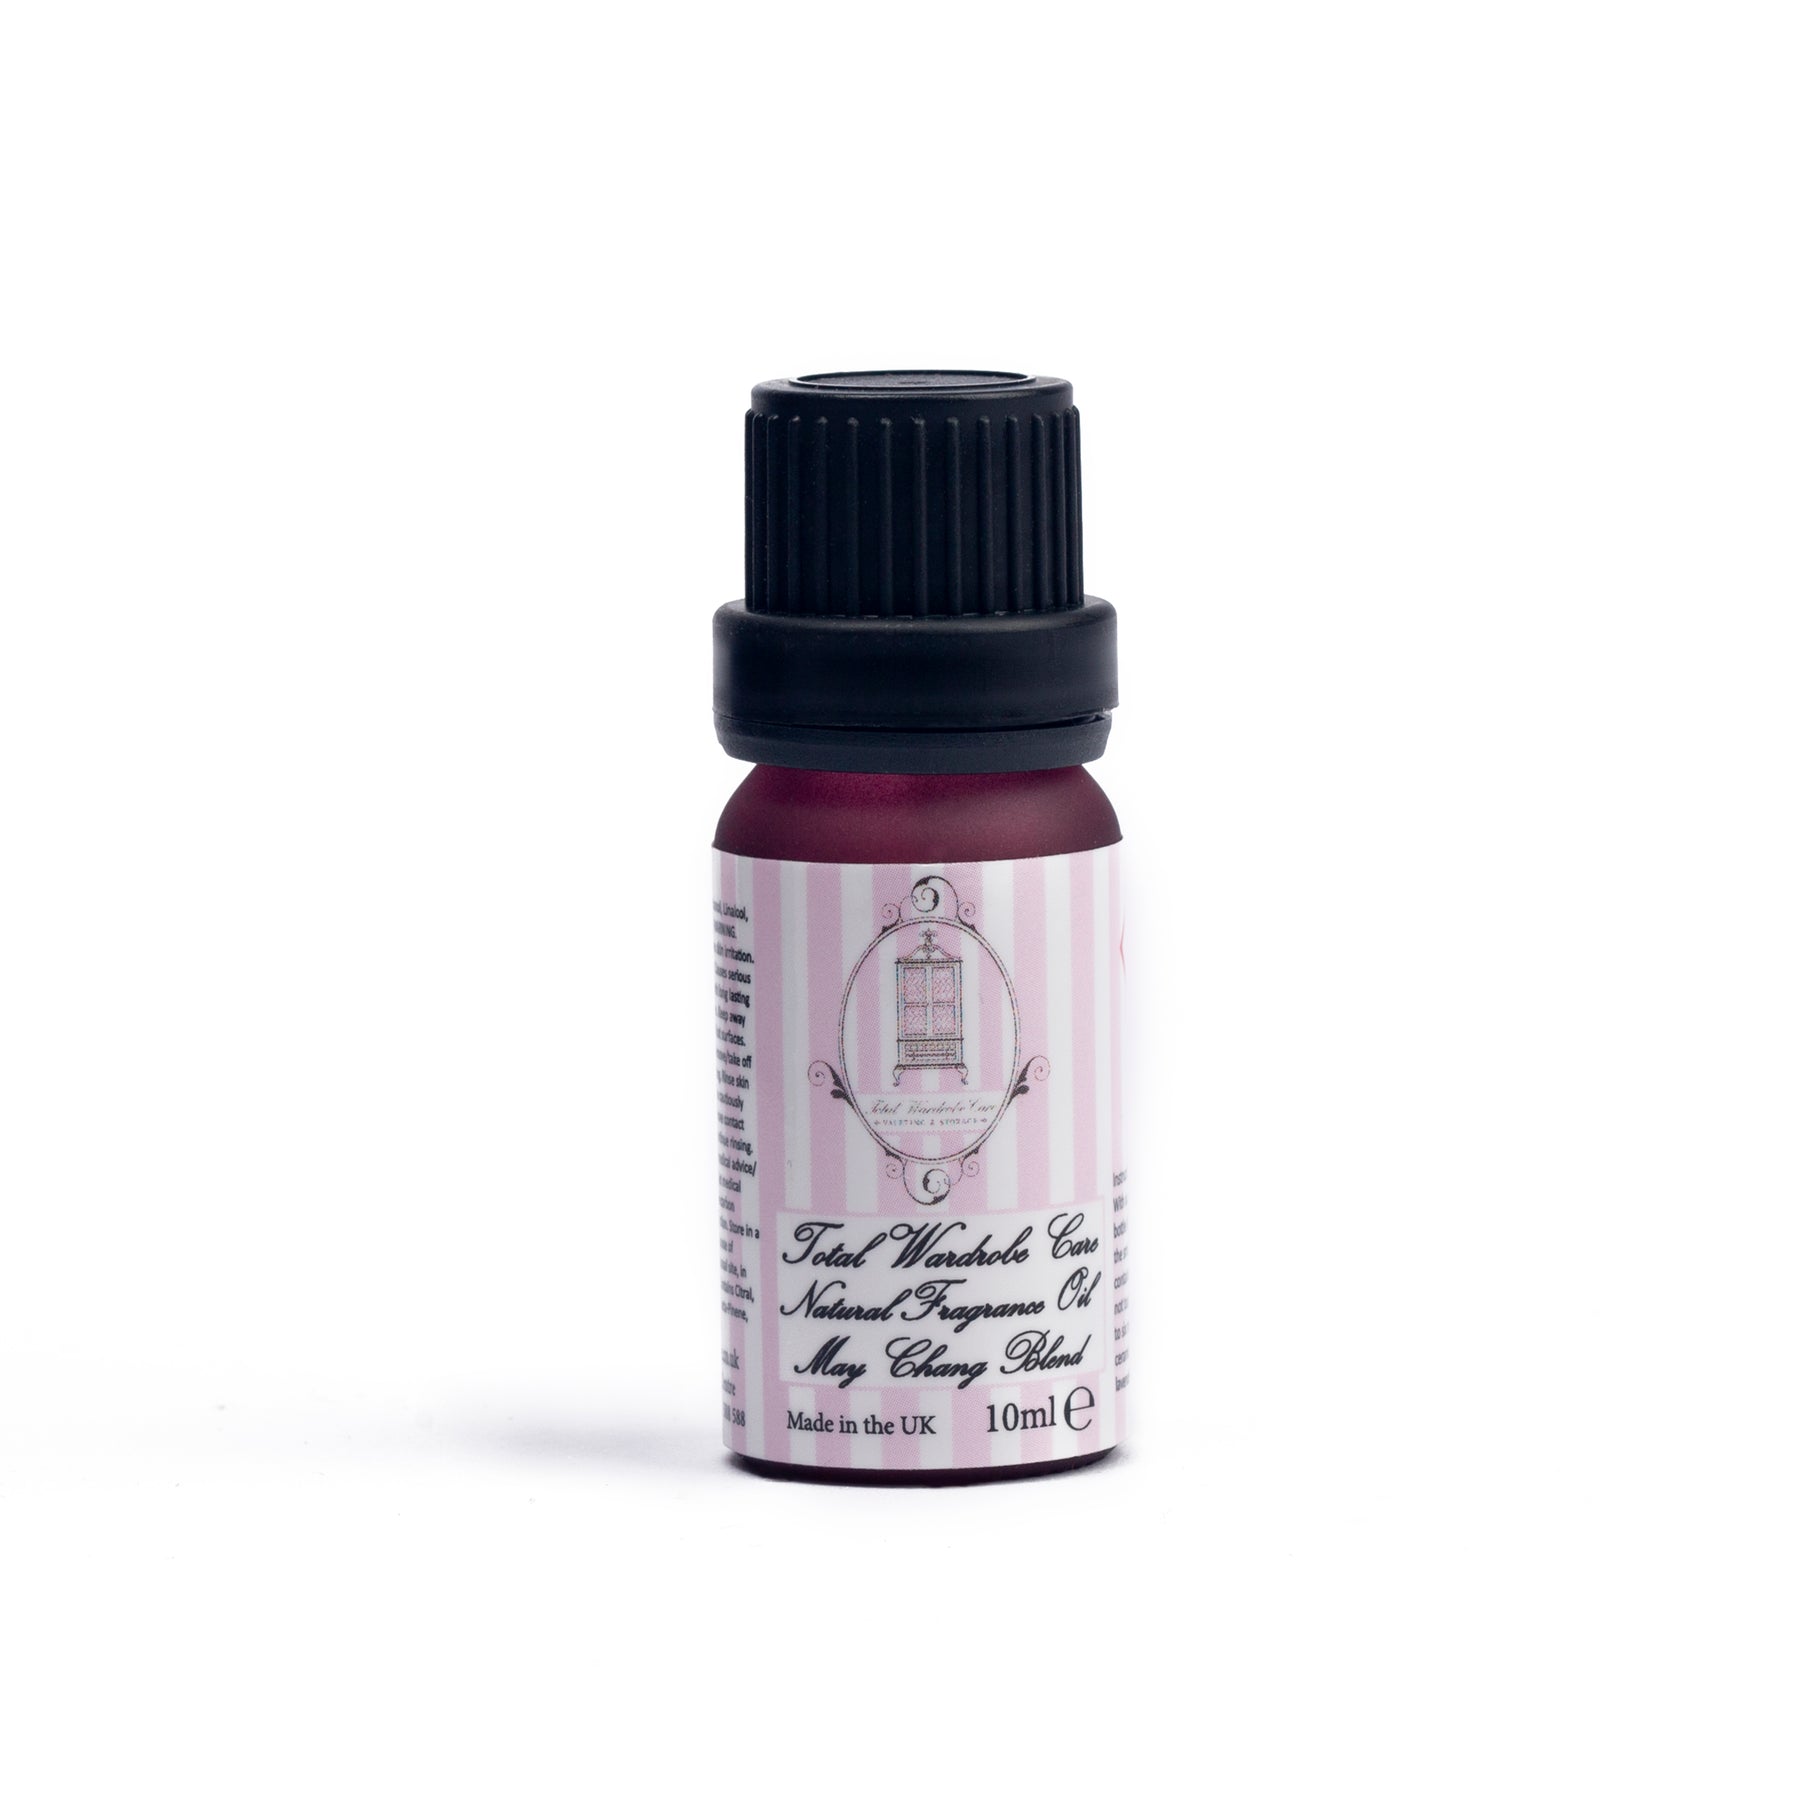 Bottle of may chang essential oil on white background